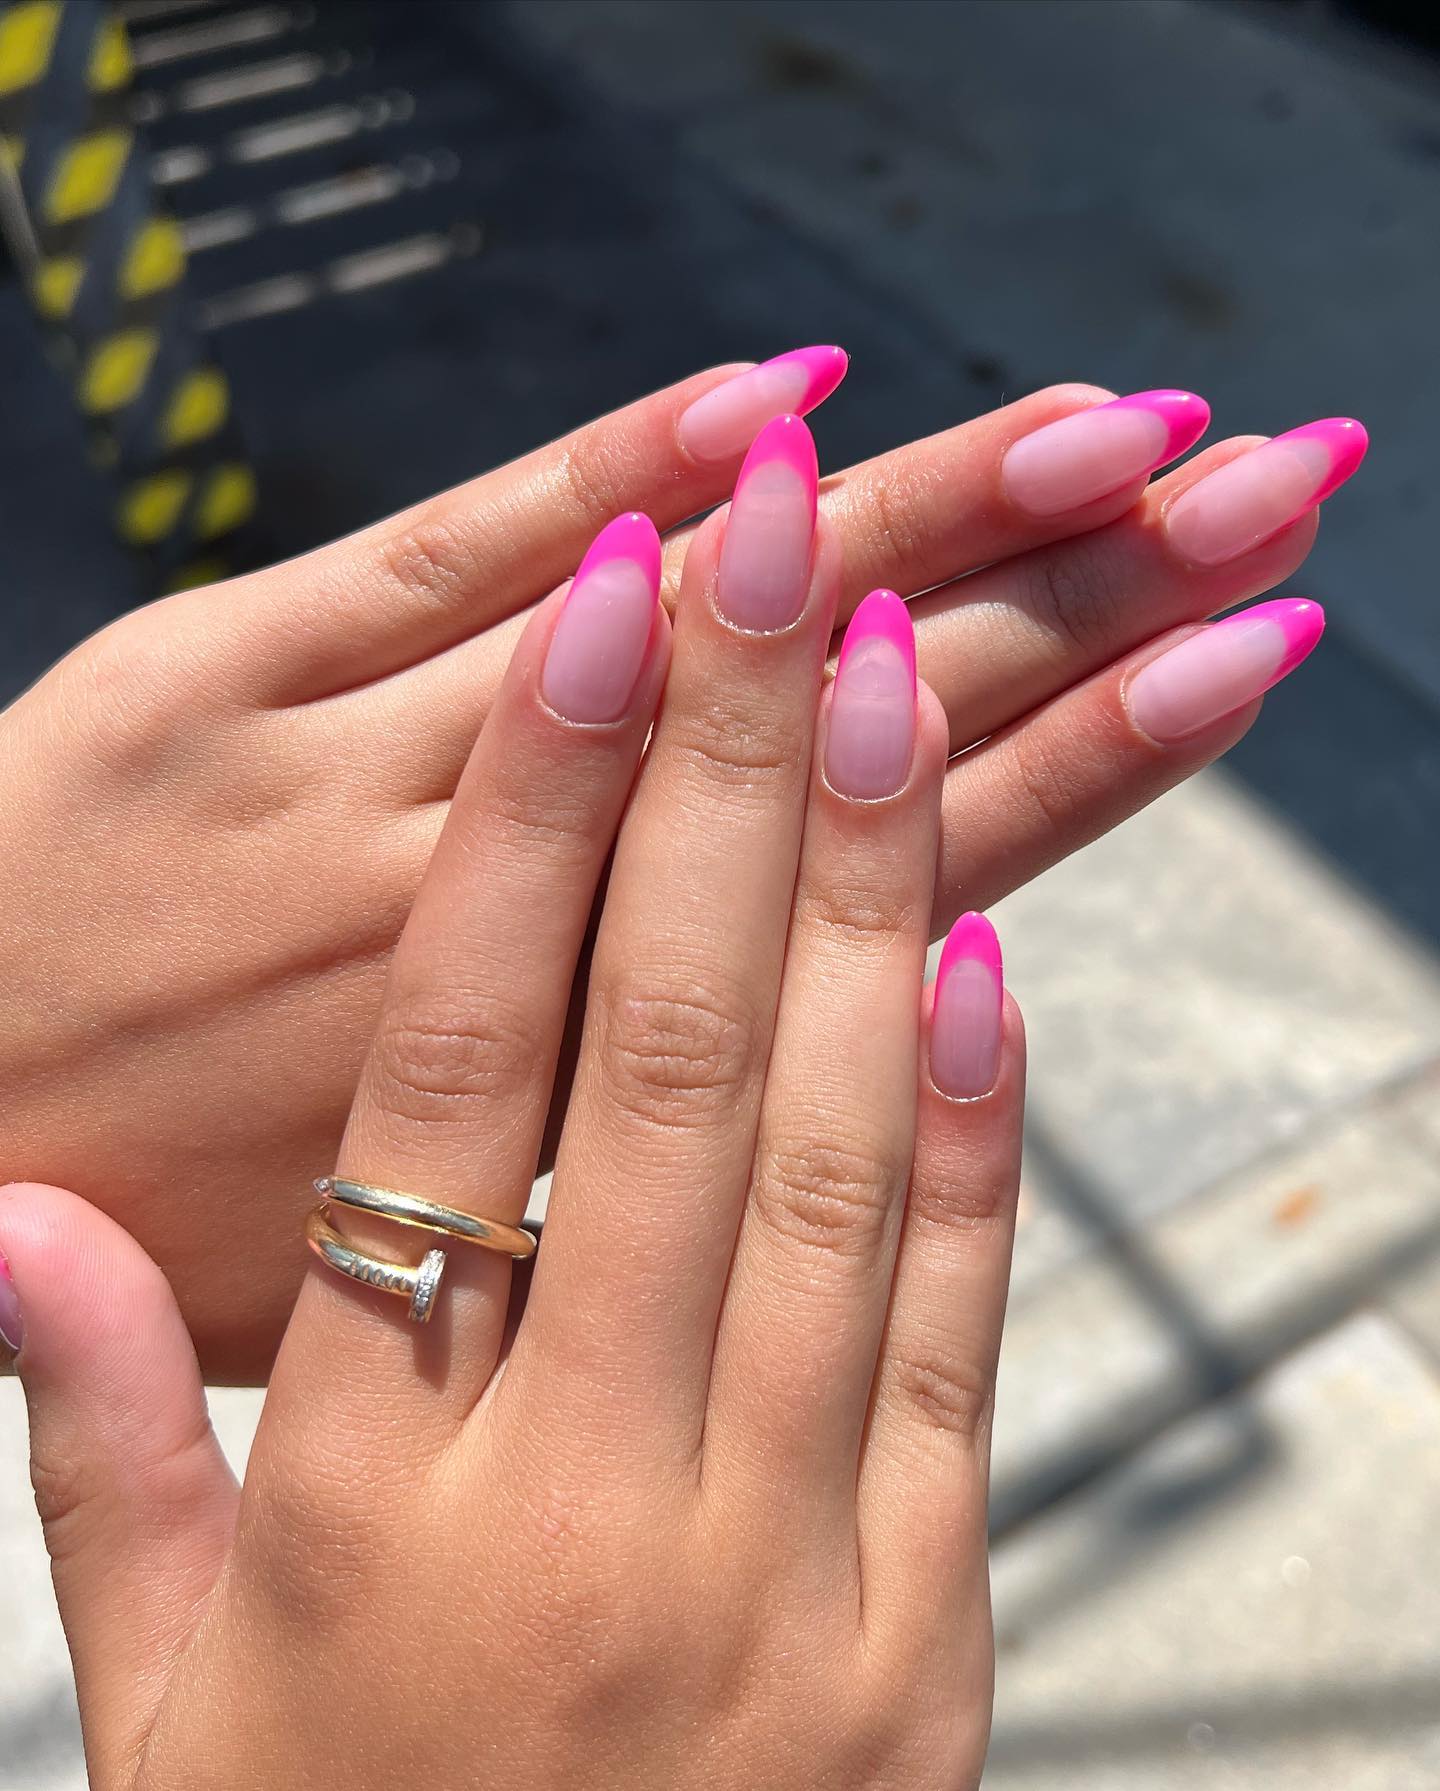 Top 10 Nail Art Ideas to Try this Summer - Stylists and beauty  professionals, manage online client bookings & scheduling